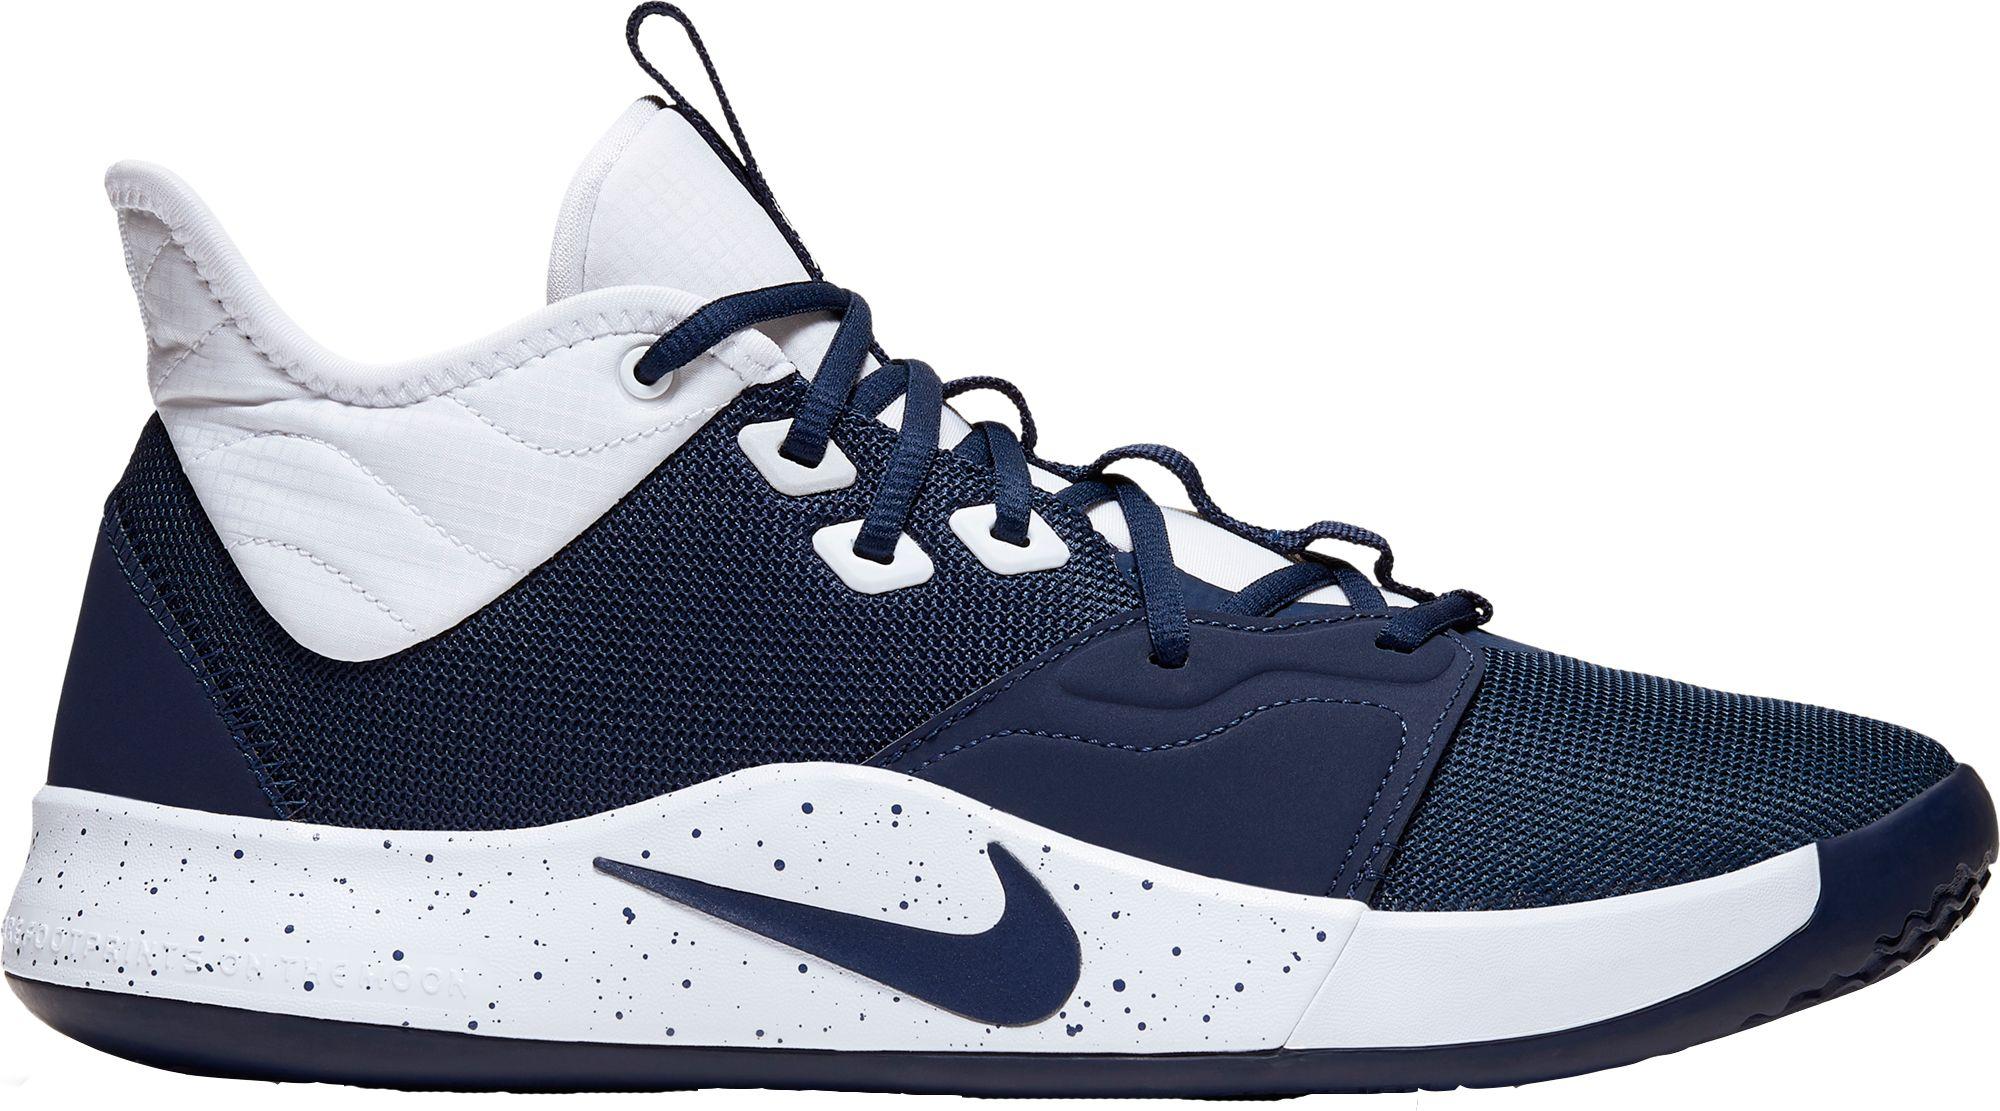 Nike Pg3 Basketball Shoes in Navy/White (Blue) | Lyst